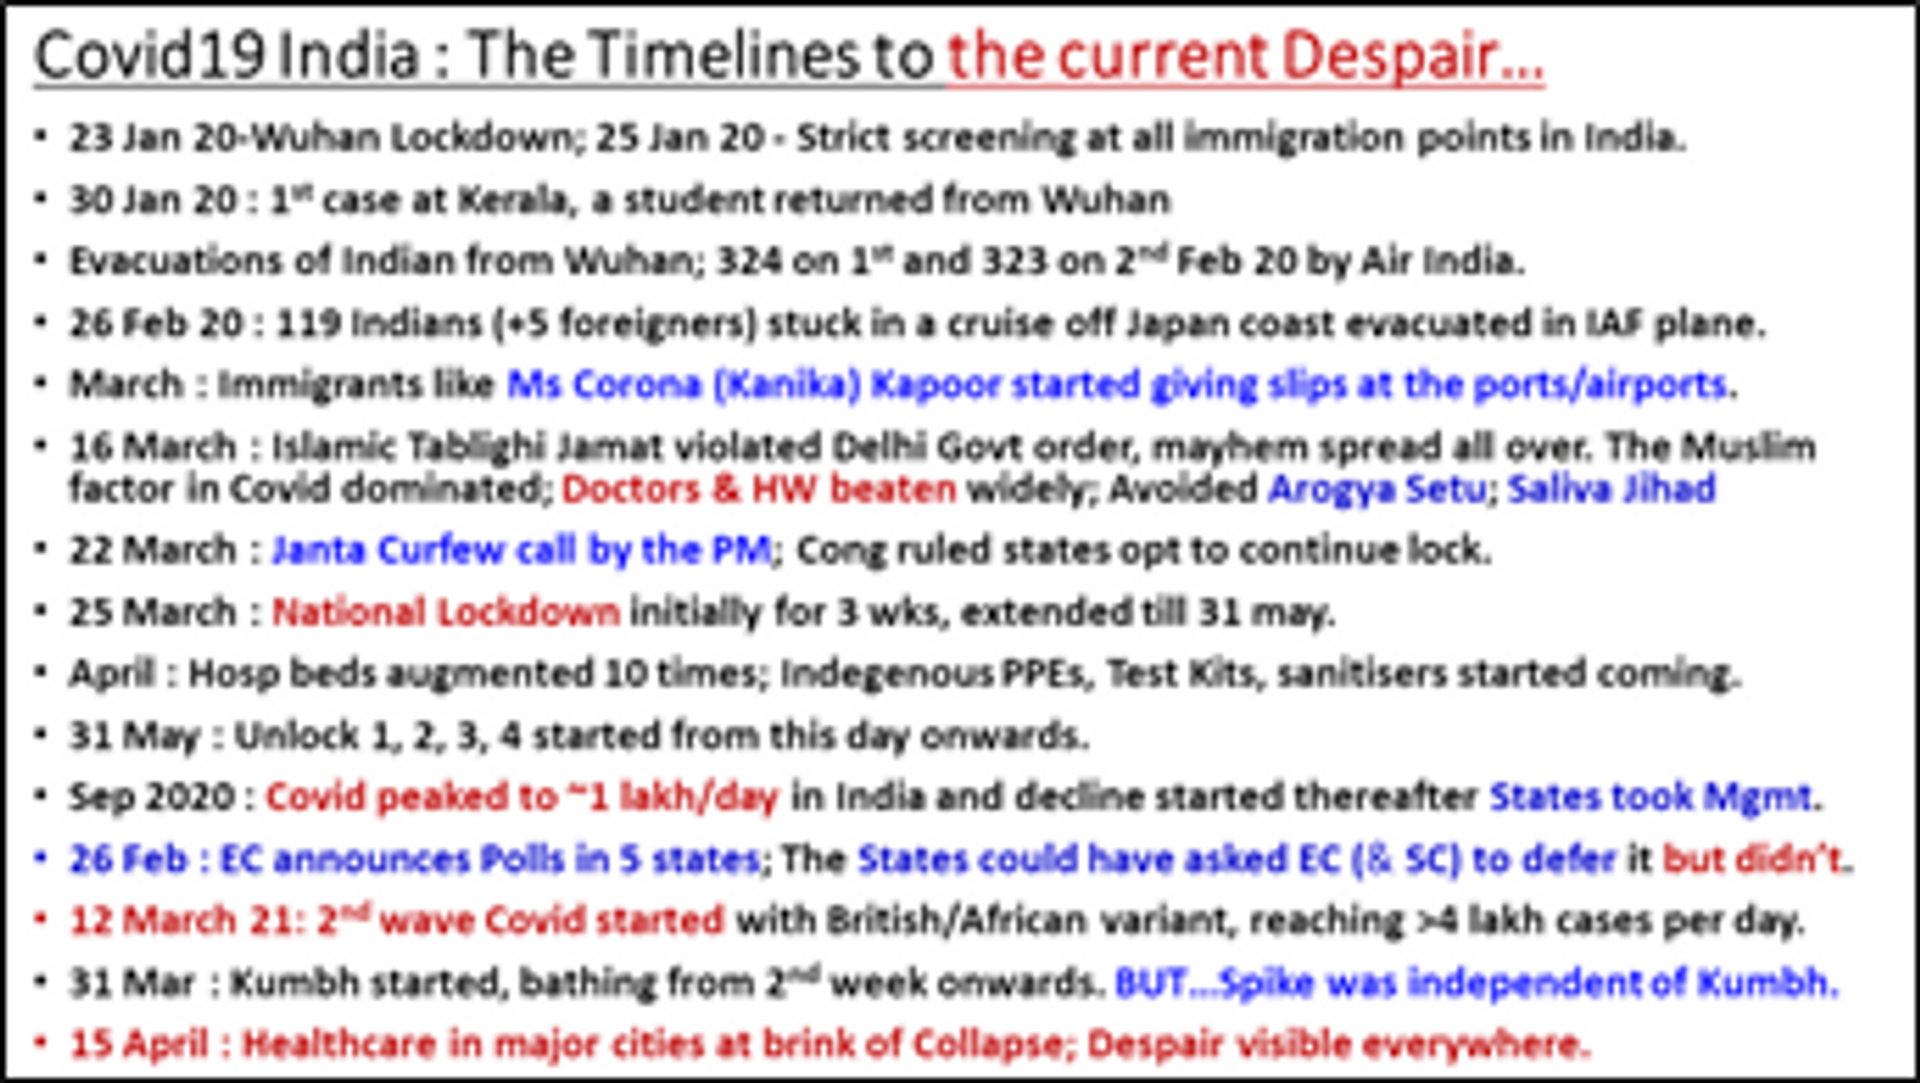 Timelines of Covid19 in India